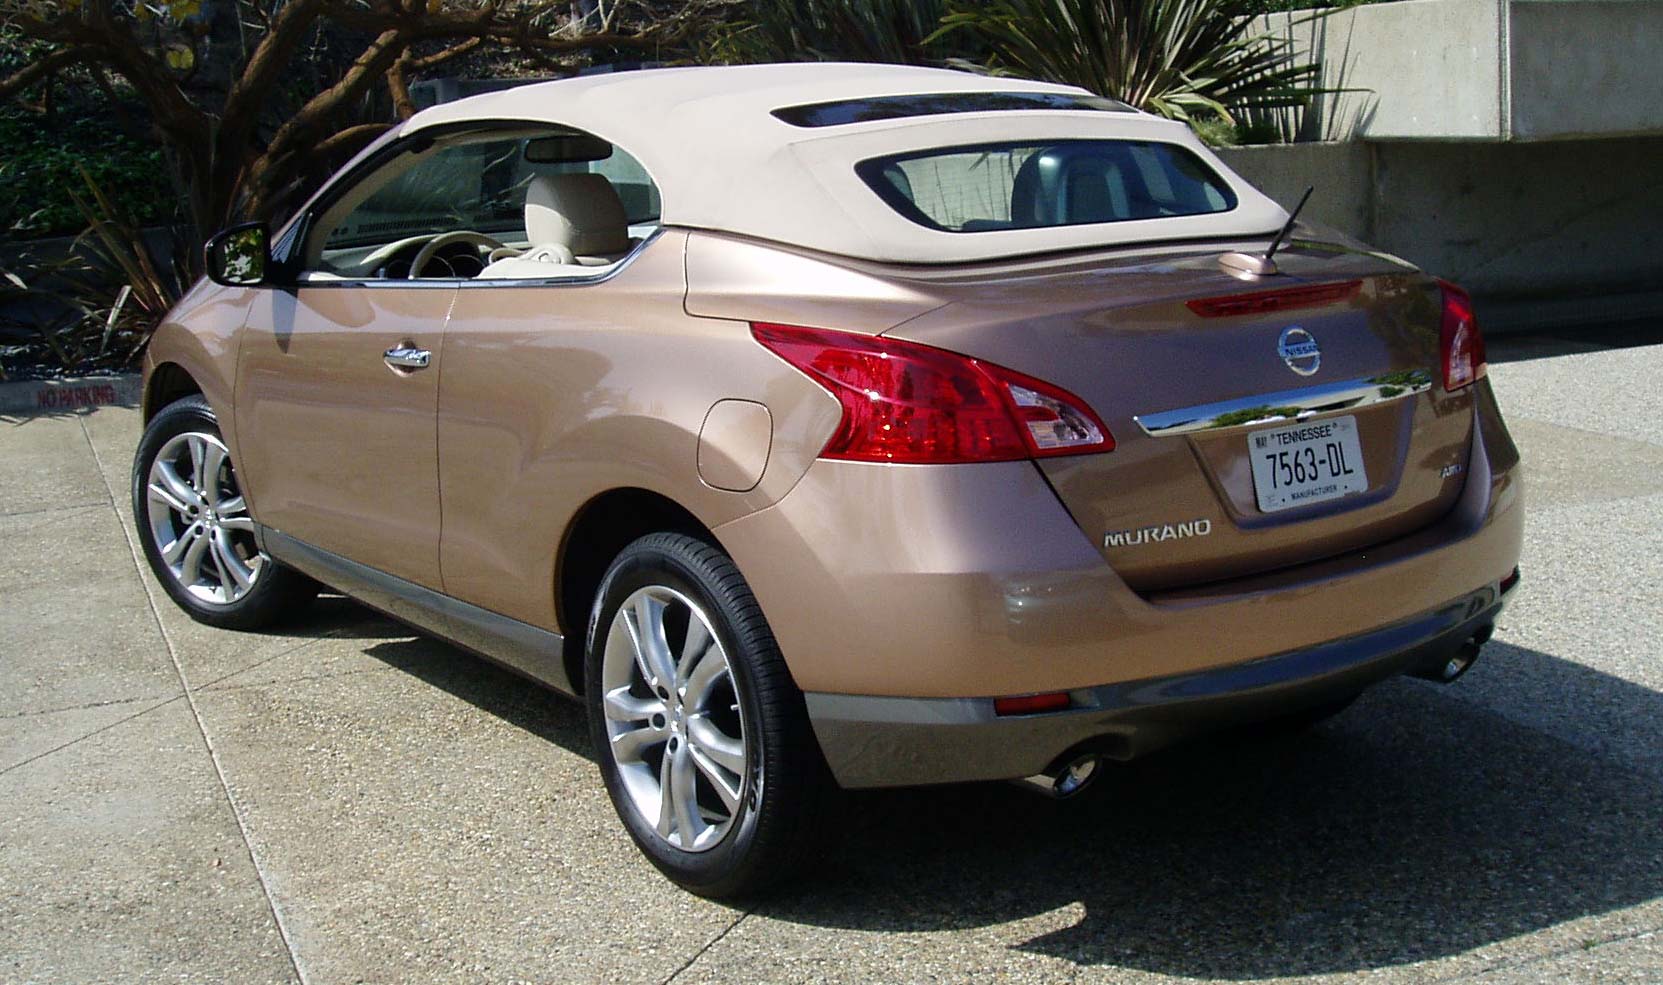 Test Drive: 2011 Nissan Murano CrossCabriolet | Our Auto Expert